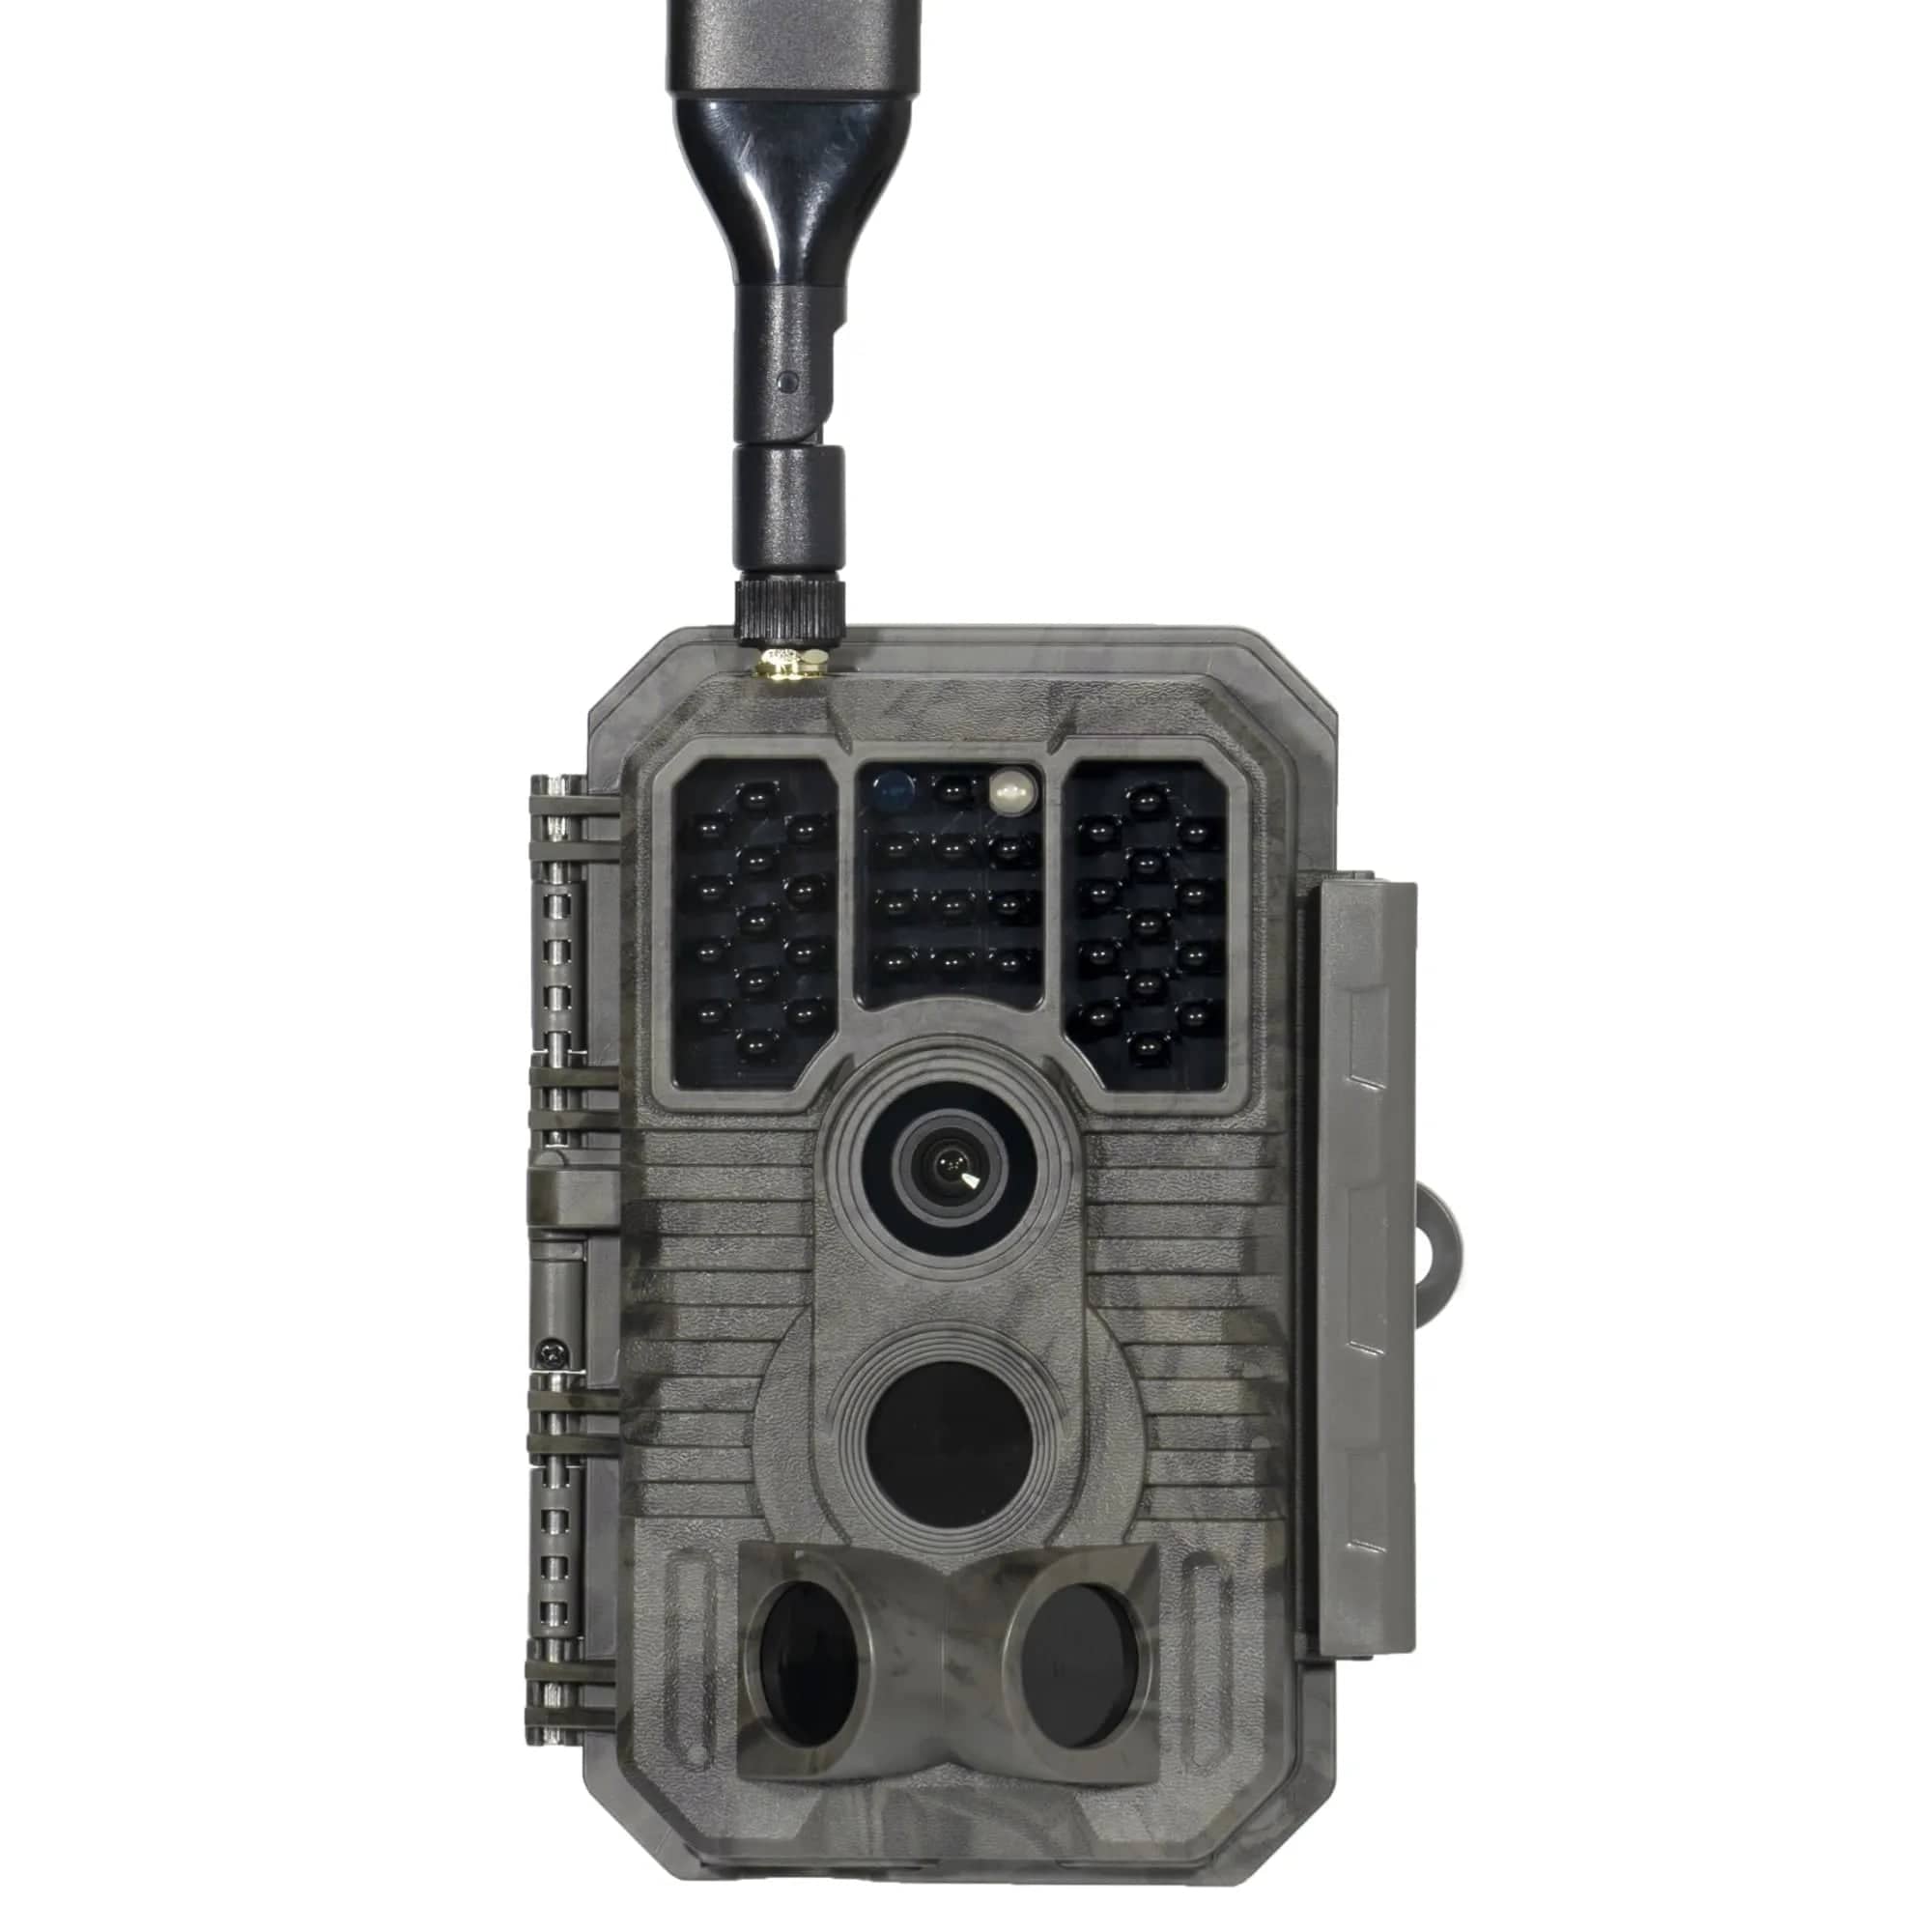 GardePro Cellular Trail Camera X60PMB Pre-Installed Contract SIM  With Rechargeable Battery & 32G Built-in Memory SD Card & Solar Panel